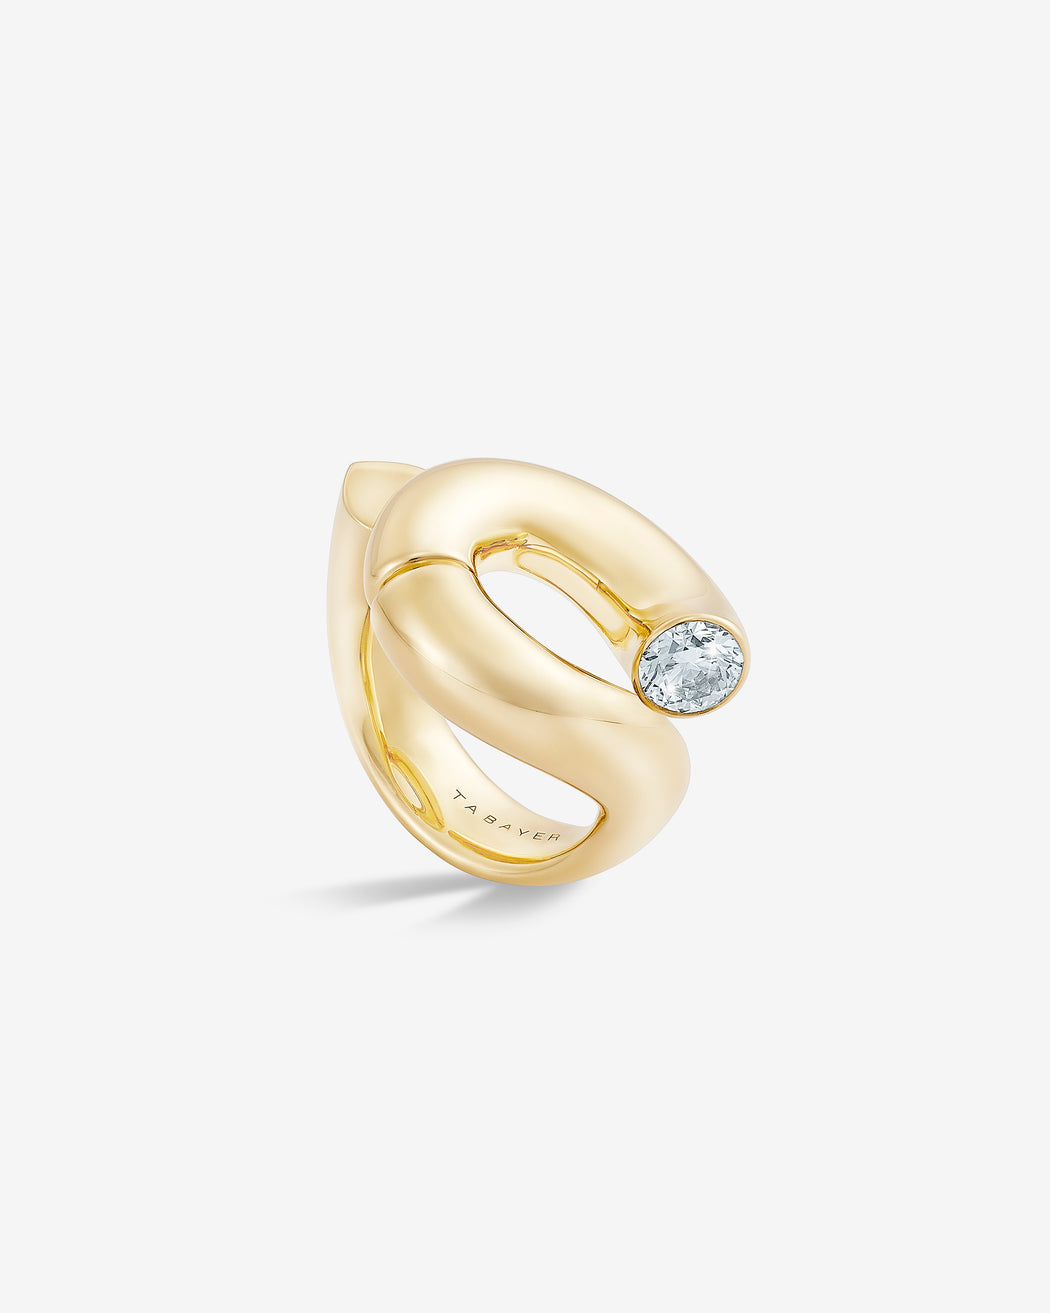 Oera ring 18k Fairmined yellow gold and diamond, Tabayer ethical fine jewelry